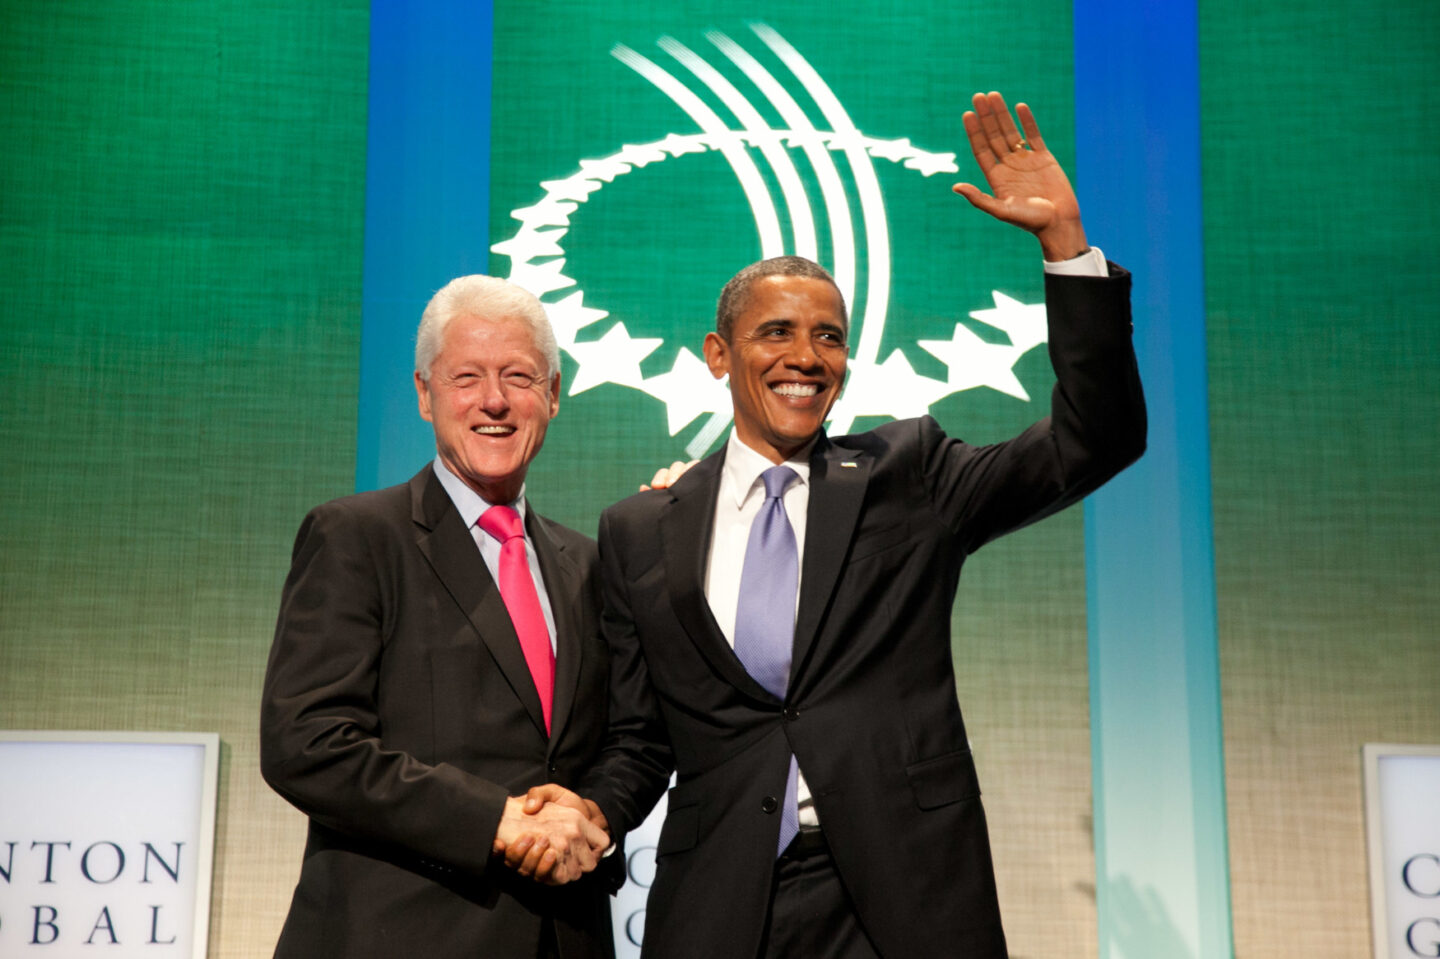 Presidents Bill Clinton and Barack Obama shake hands on stage